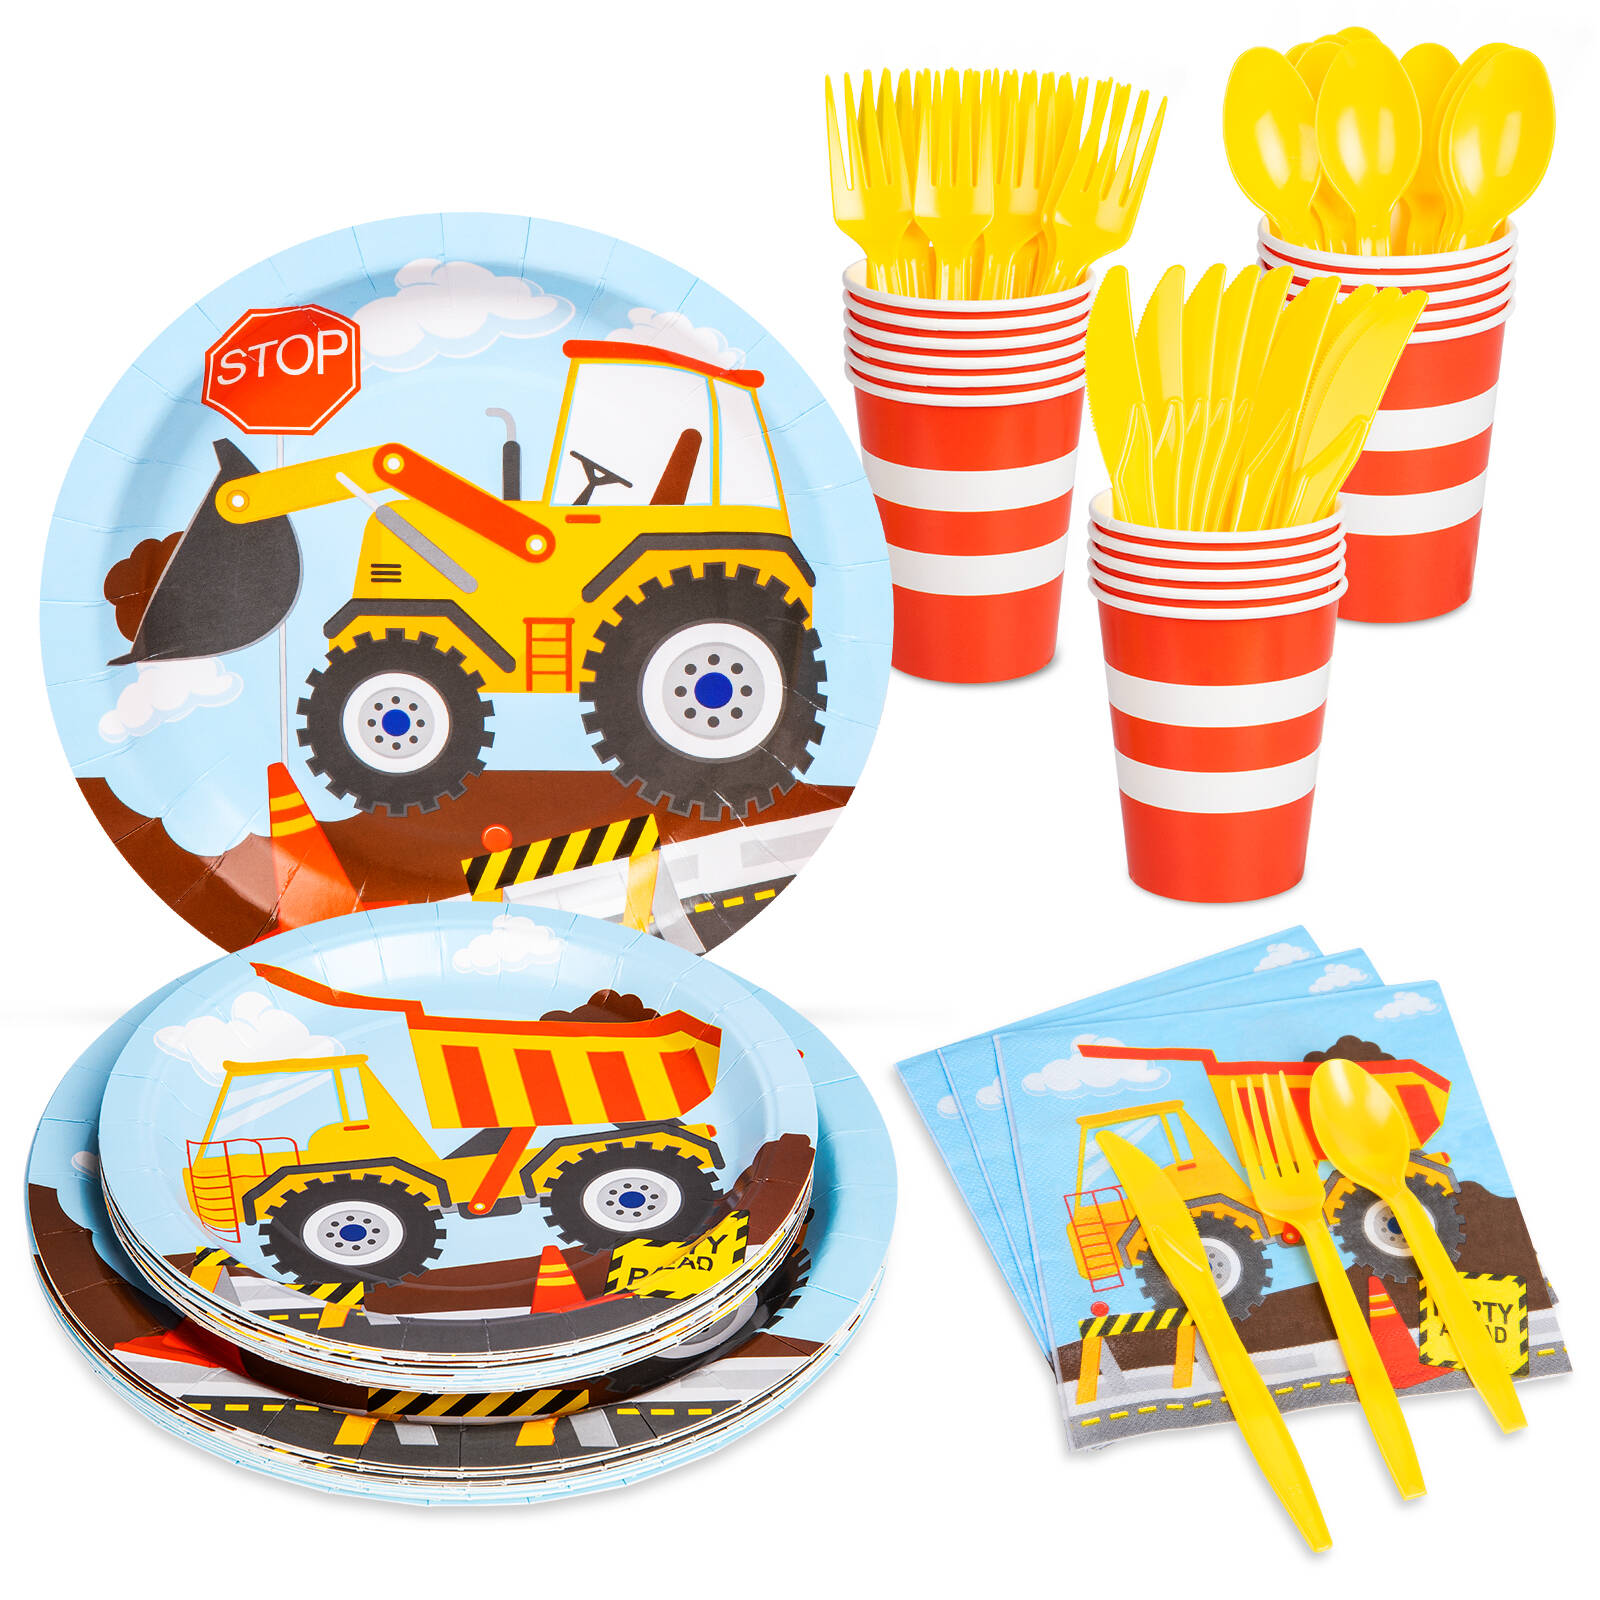 Construction Birthday Party Supplies for 16.jpg